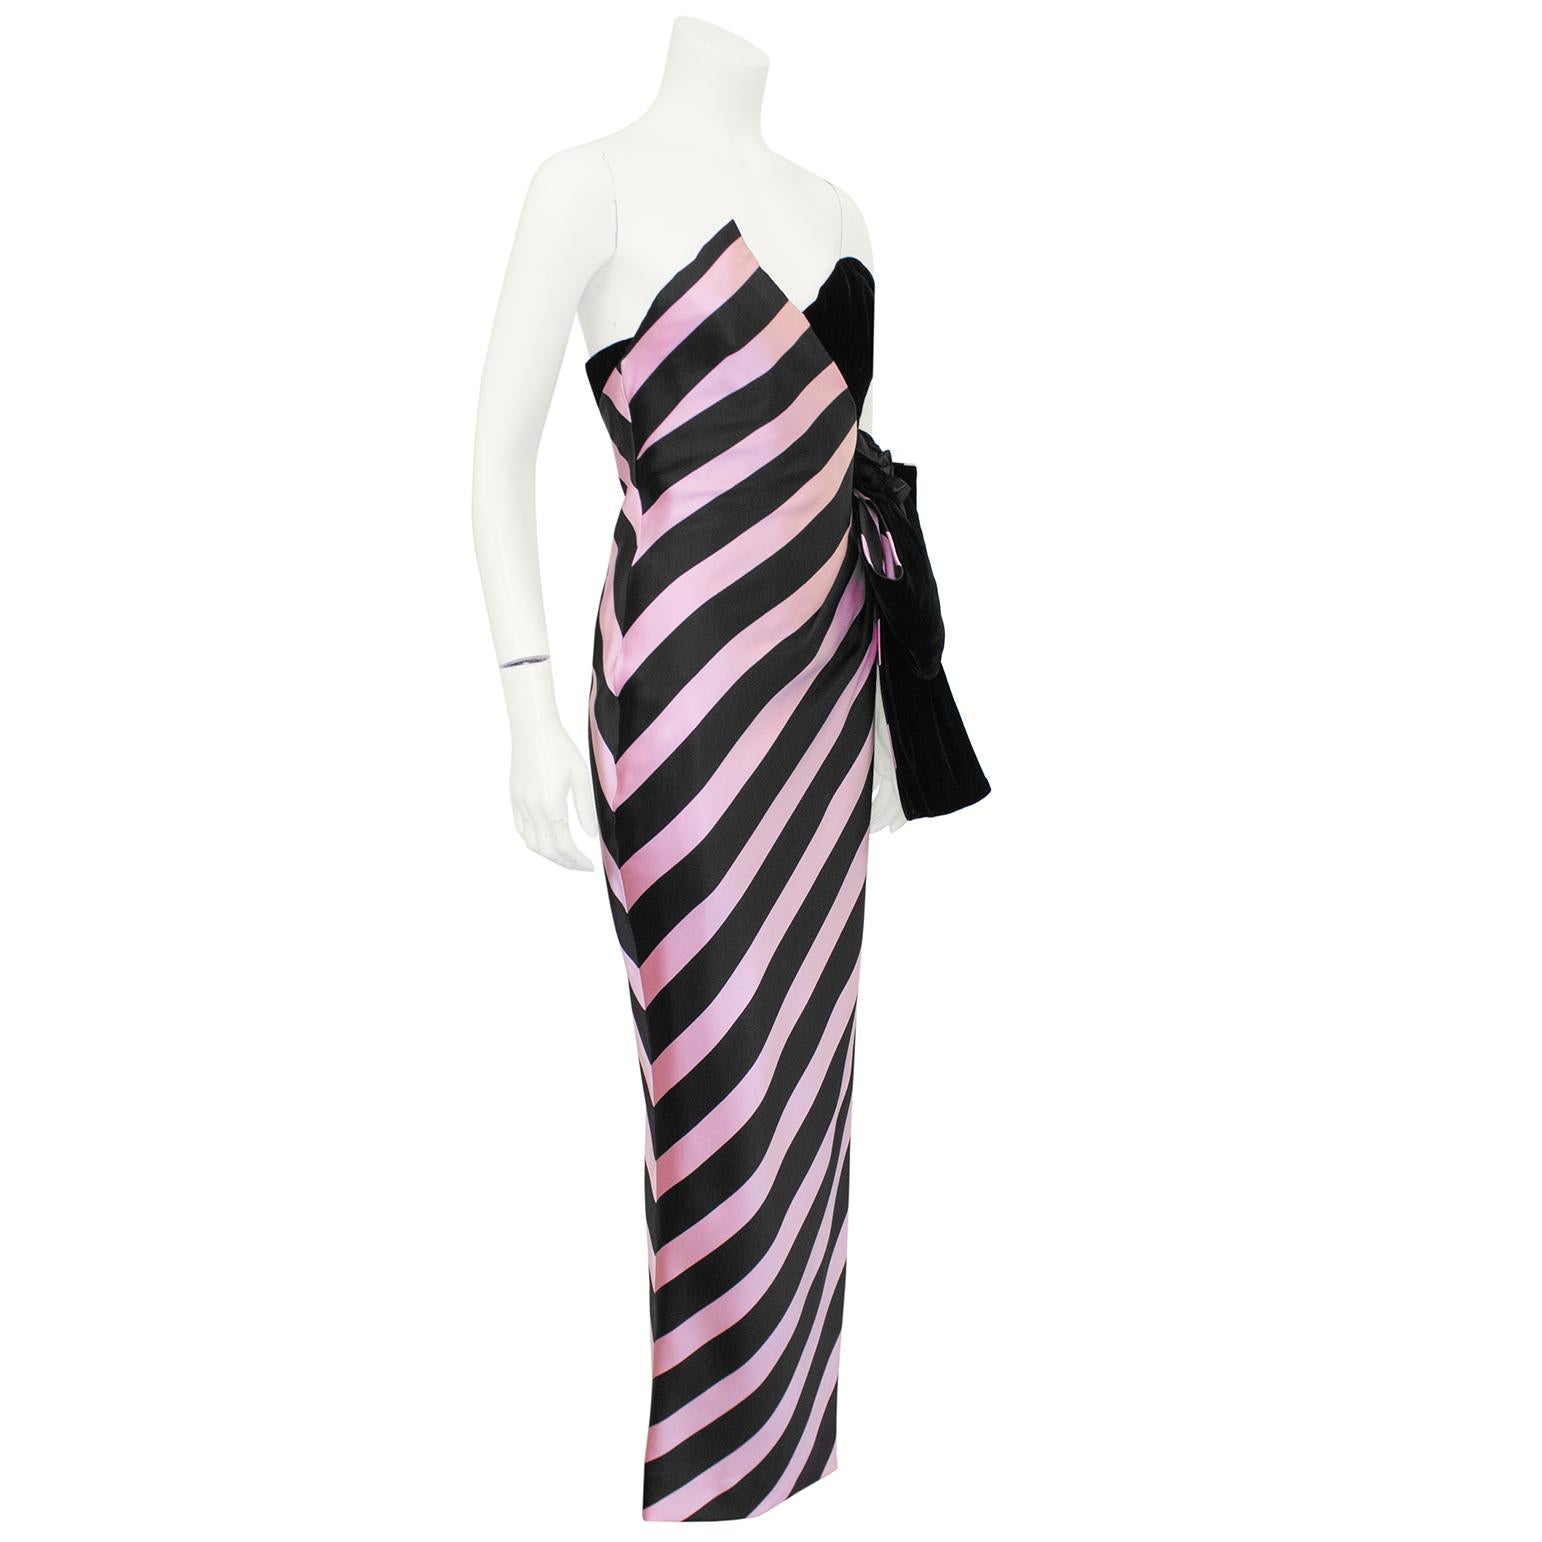 Bellville Sasoon black and pink strapless evening gown from the 1980s. The asymmetrical gown is half diagonally striped silk and half black velvet with a large black velvet bow and corsage. The gown's sweetheart neckline is pointed on one side and